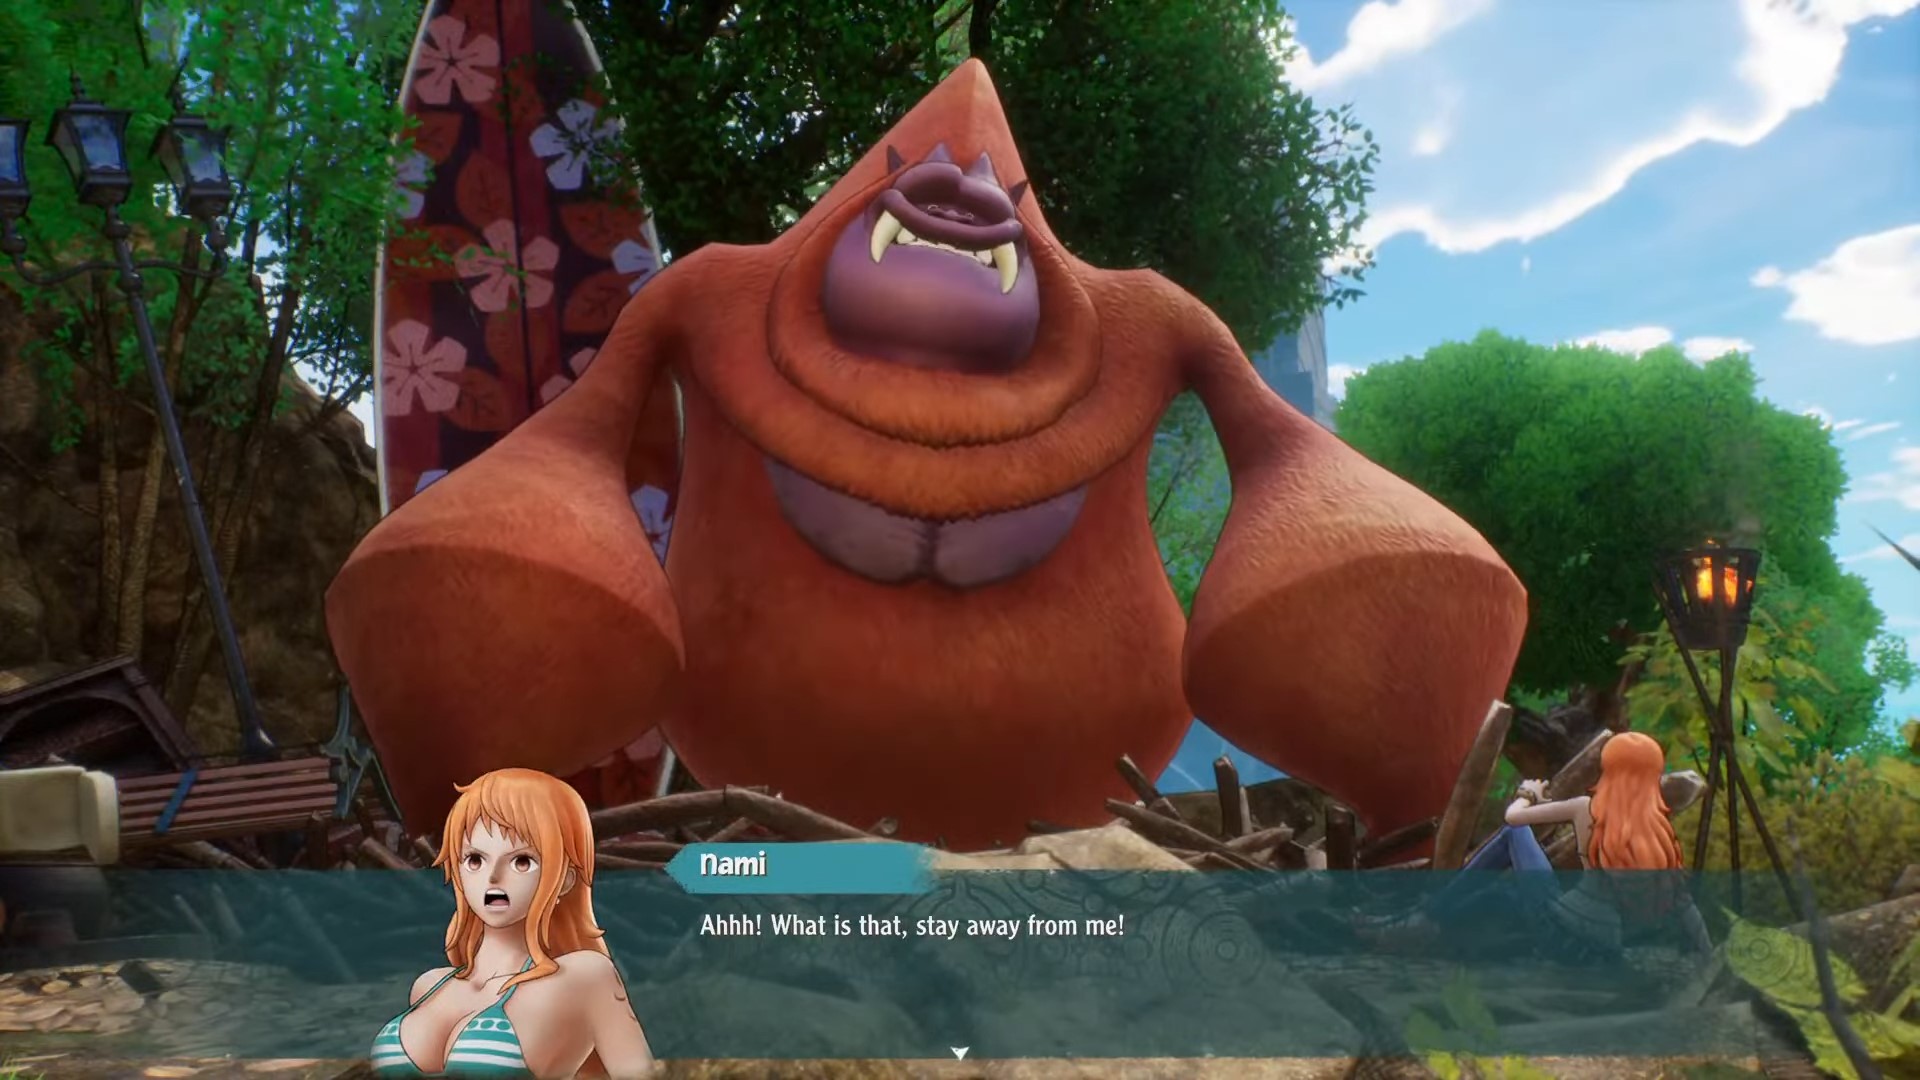 How to Rescue Nami from the Beast in One Piece odyssey